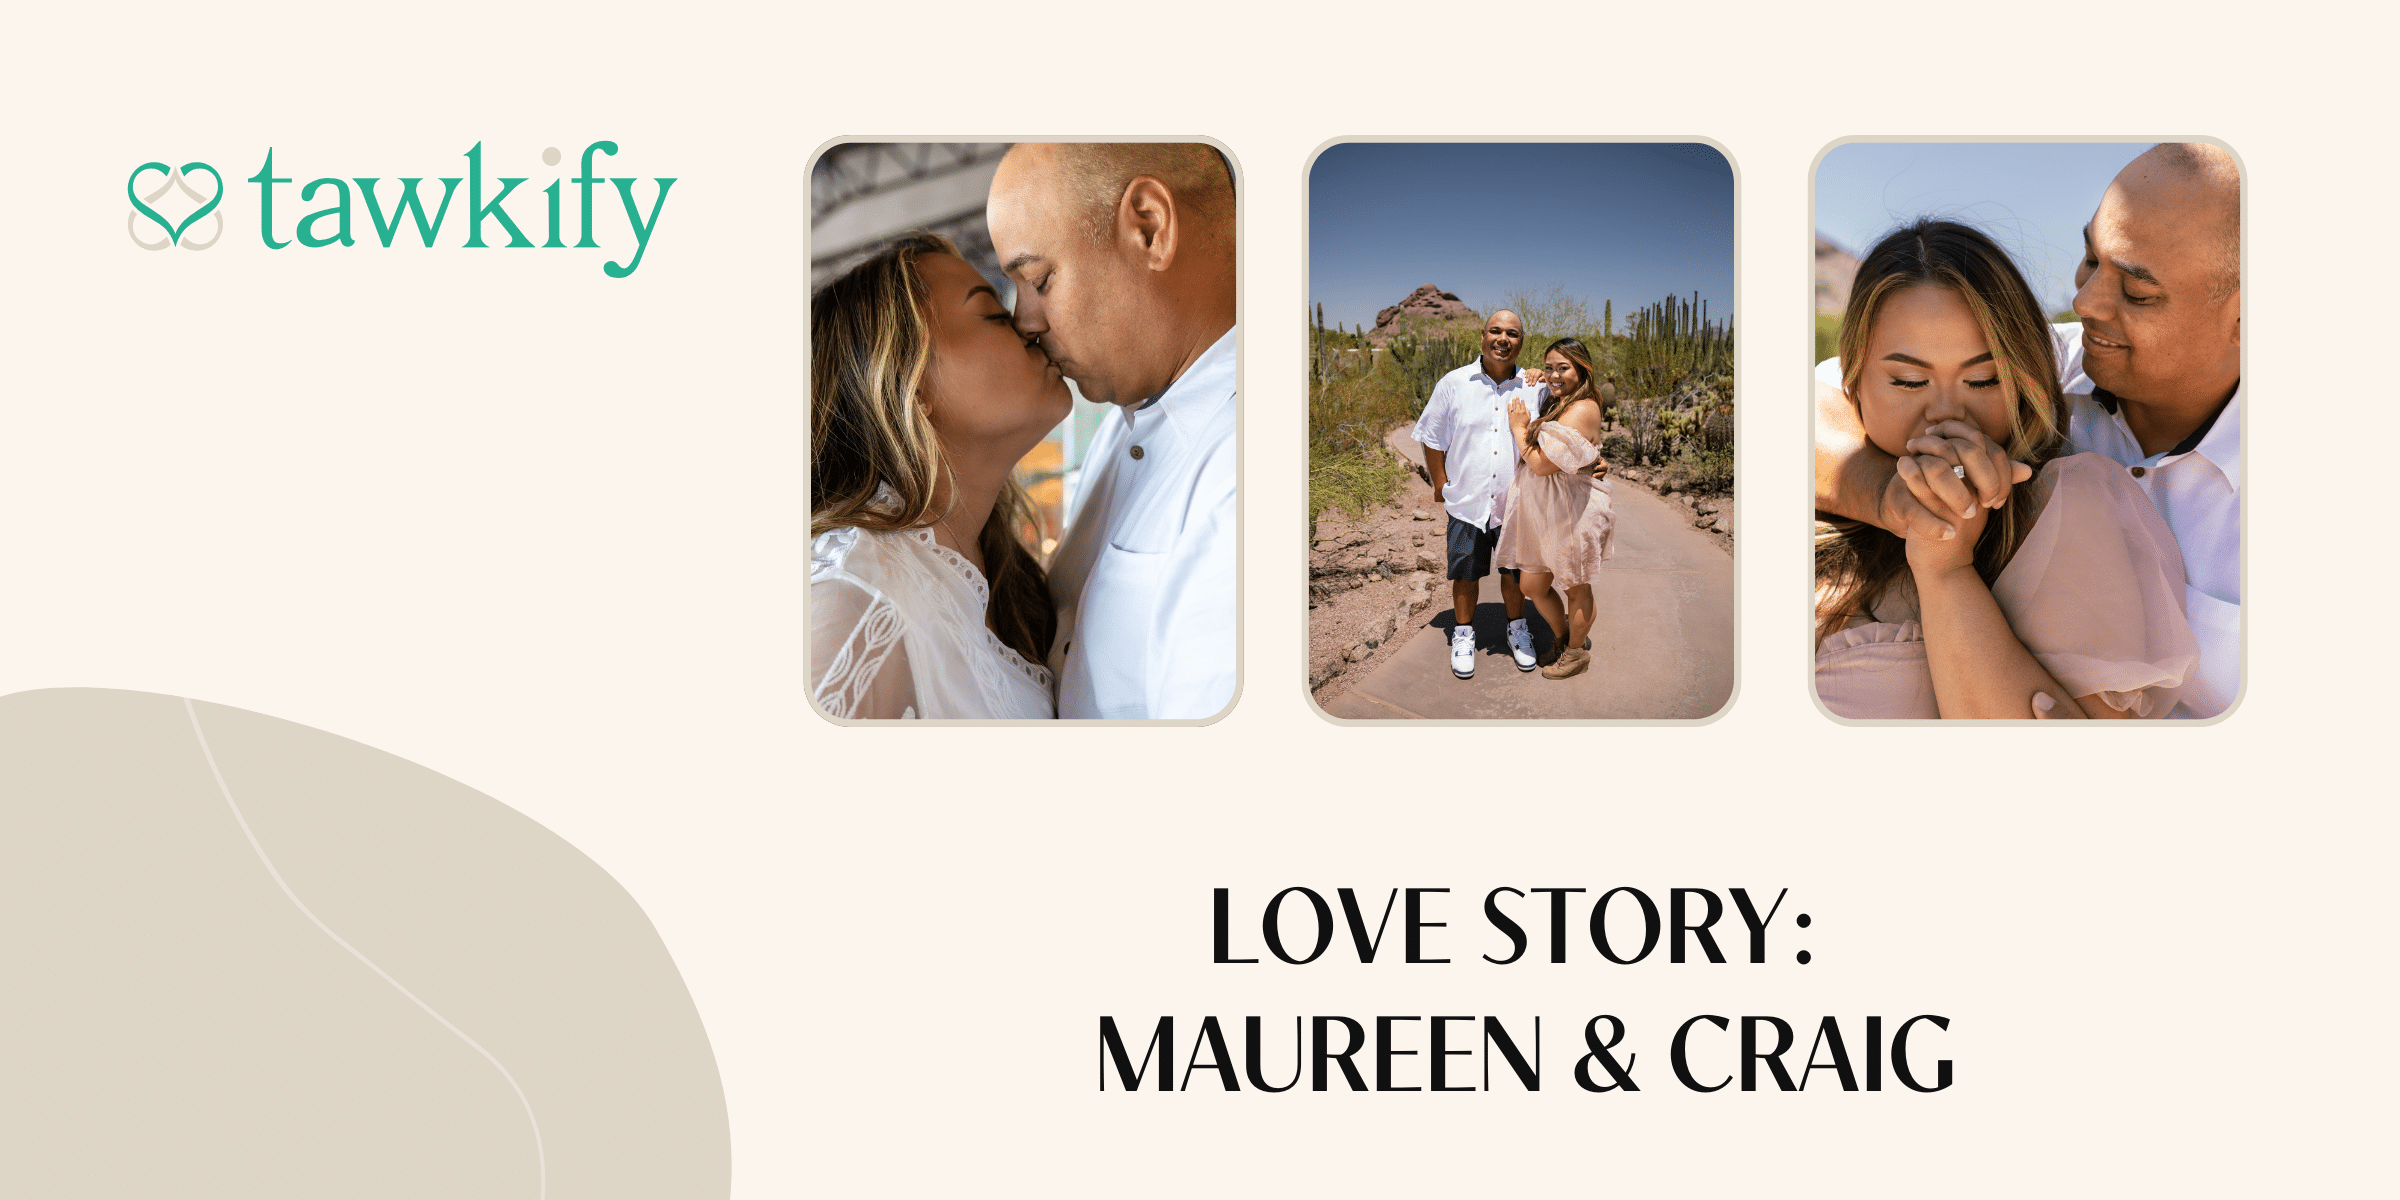 Learn how two people took their love to great heights in this Tawkify success story.